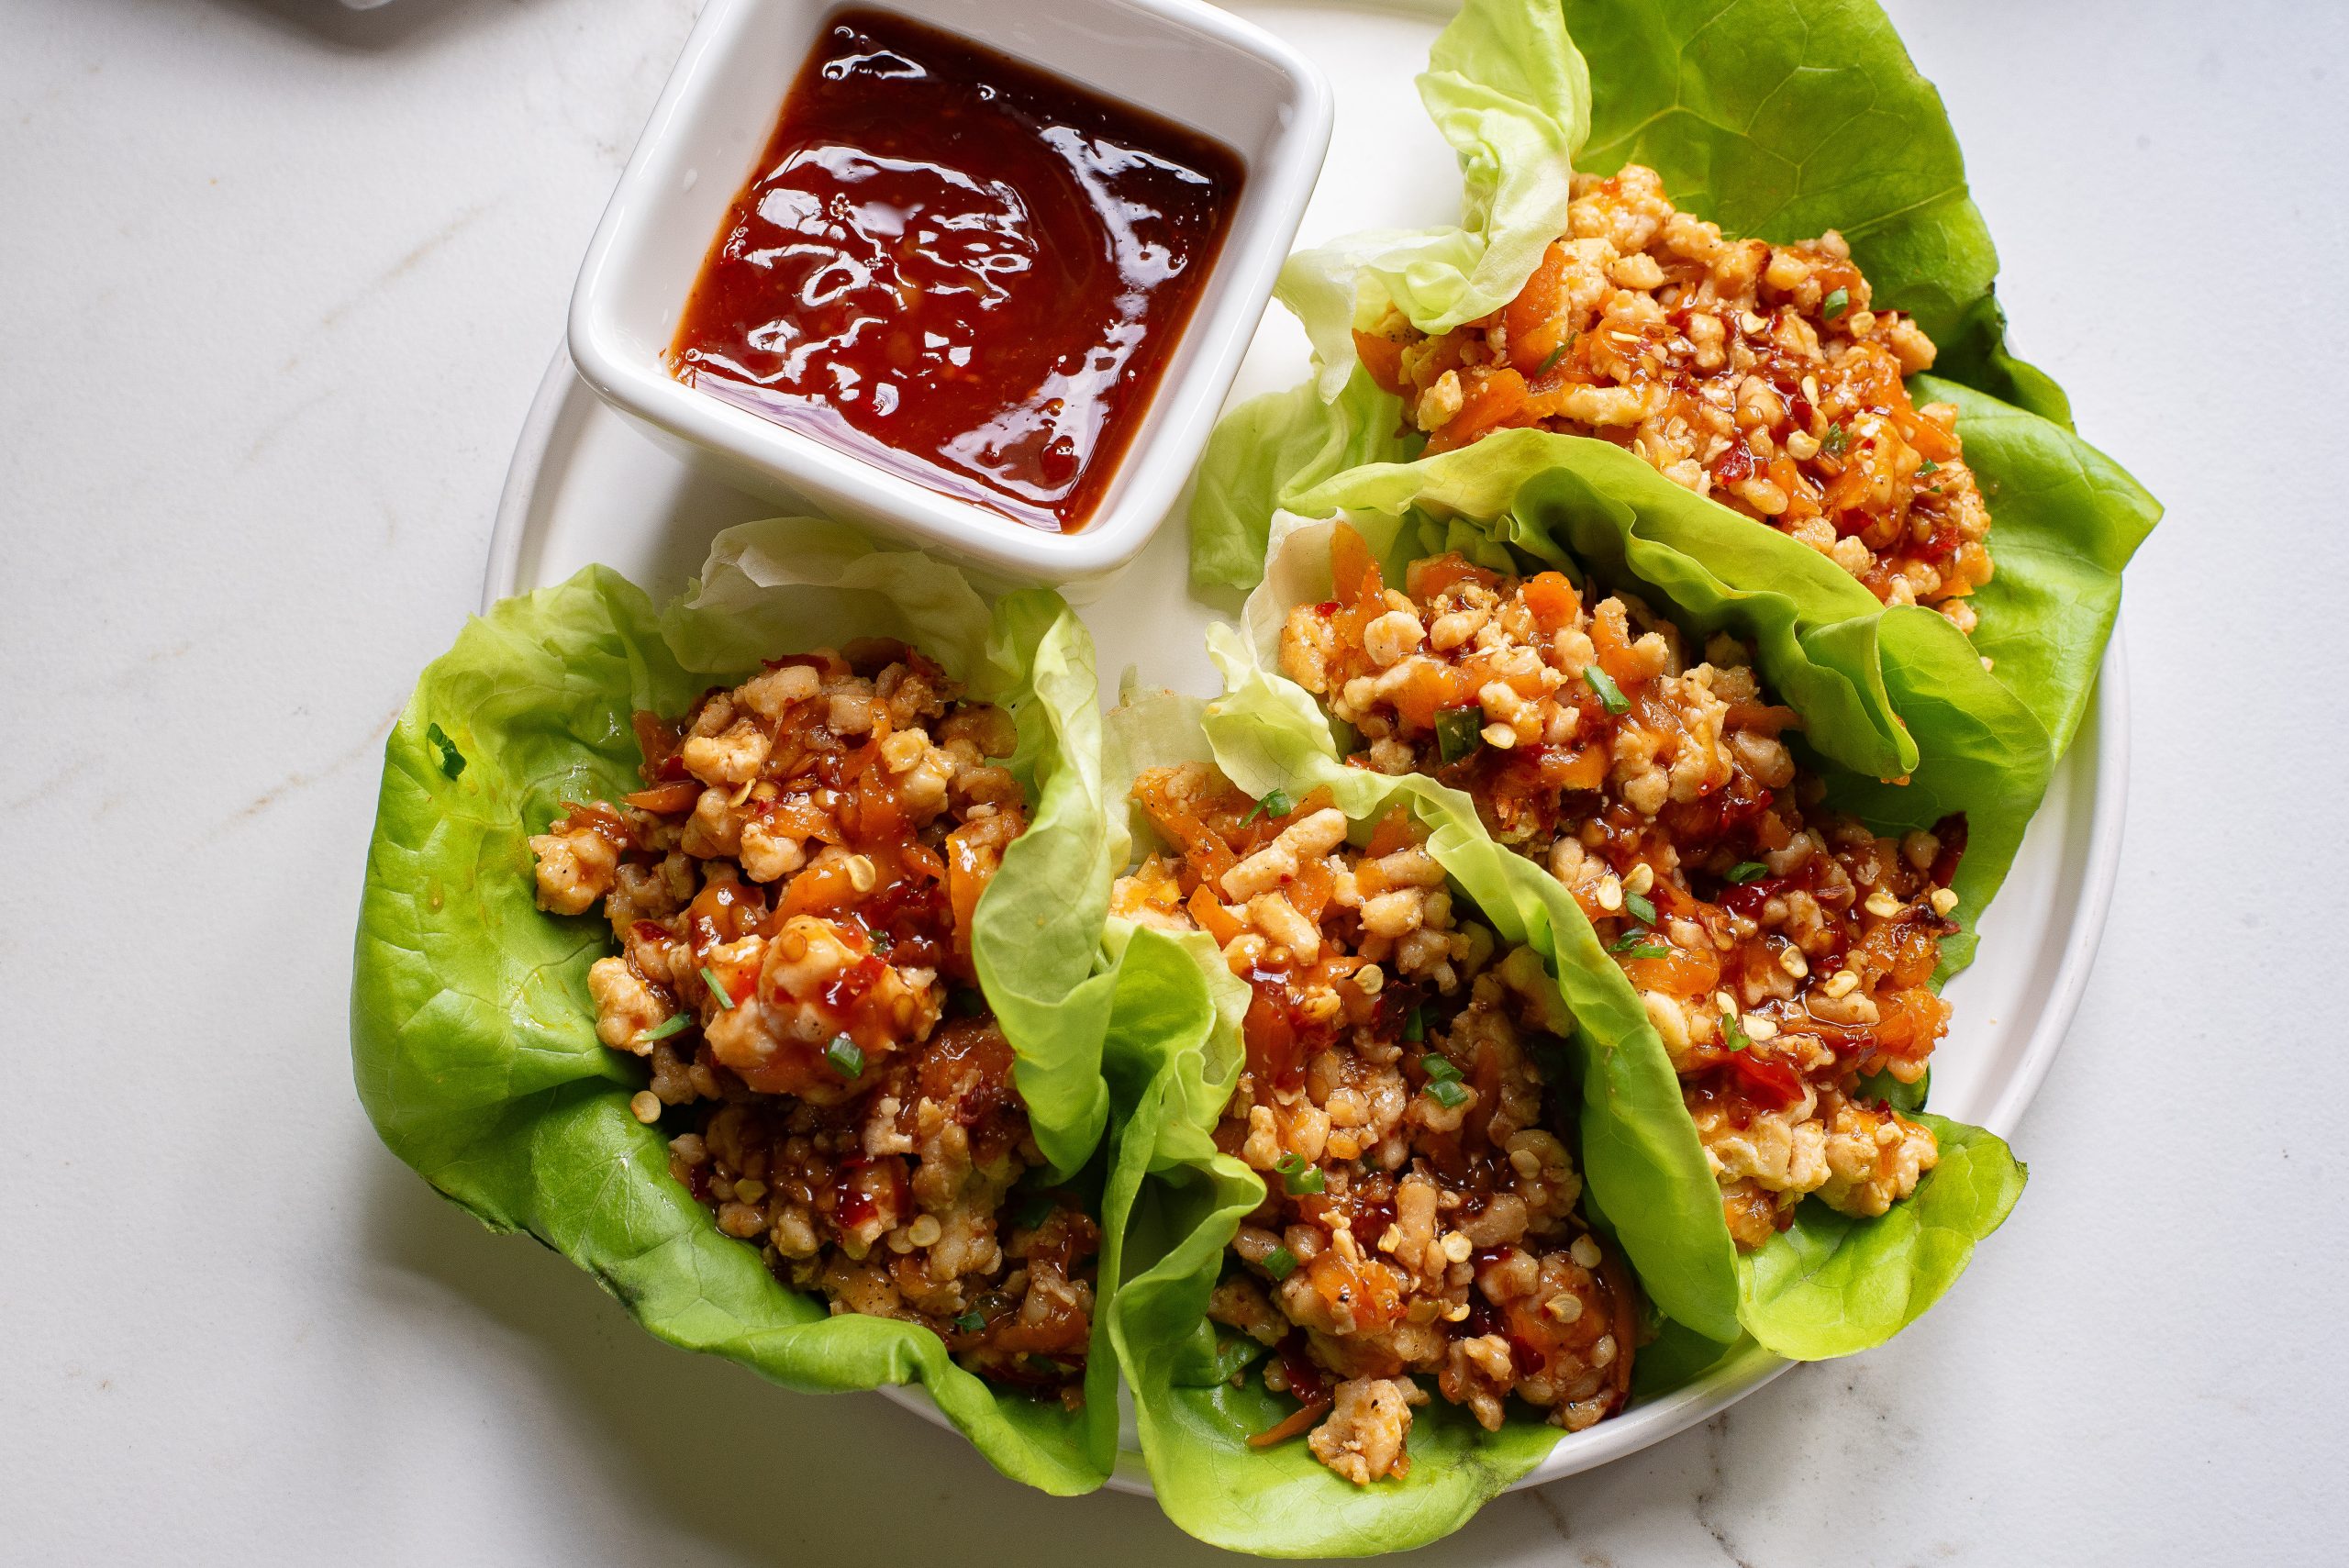 Lettuce wraps filled with savory minced meat and grains, served with a side of red sauce on a white plate.